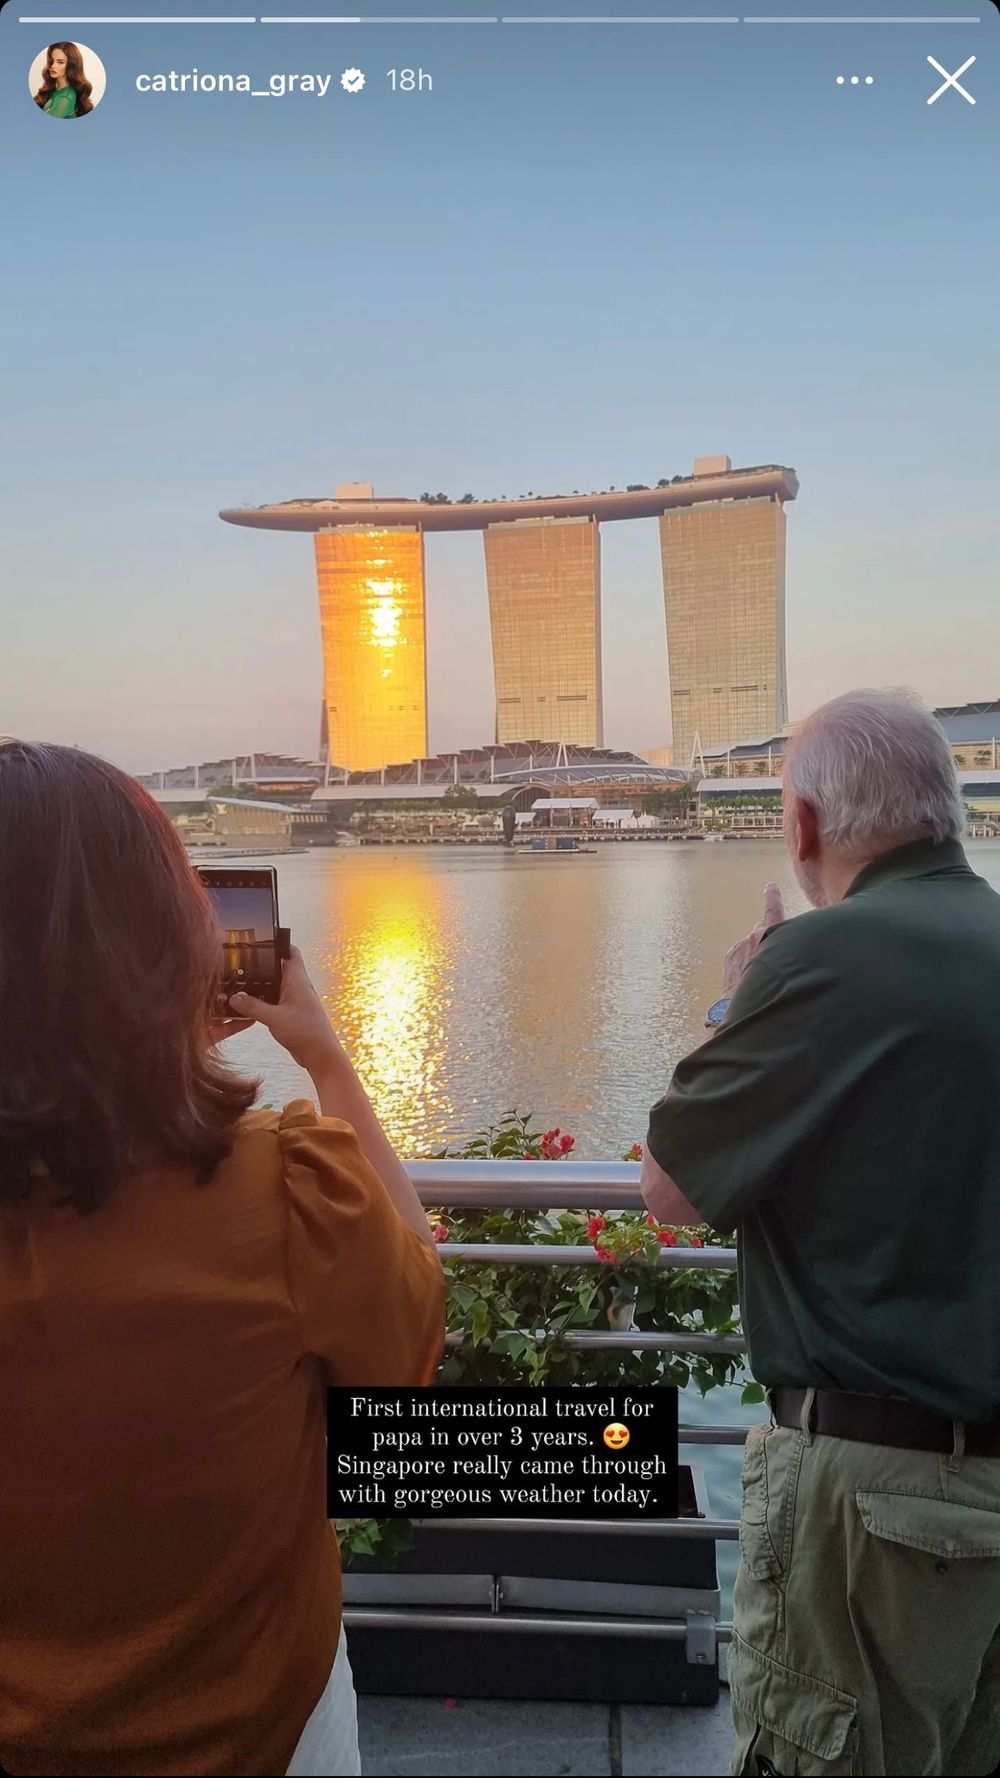 Catriona Gray poses with parents at the Marina Bay Sands